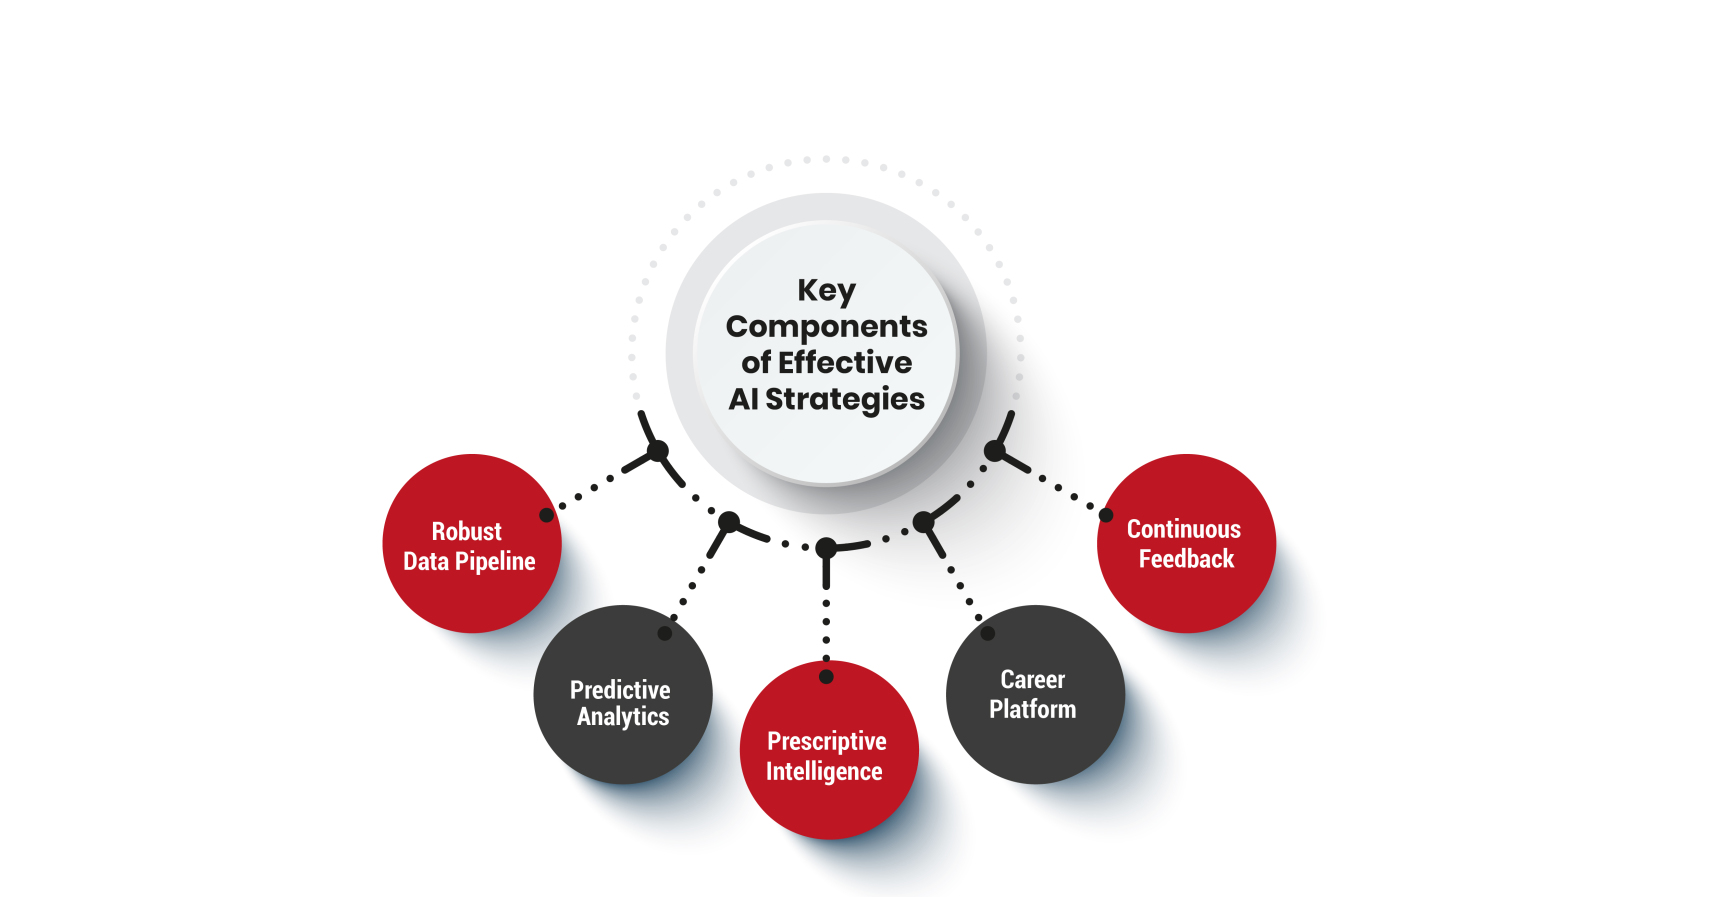 Key Components of Effective AI Strategies